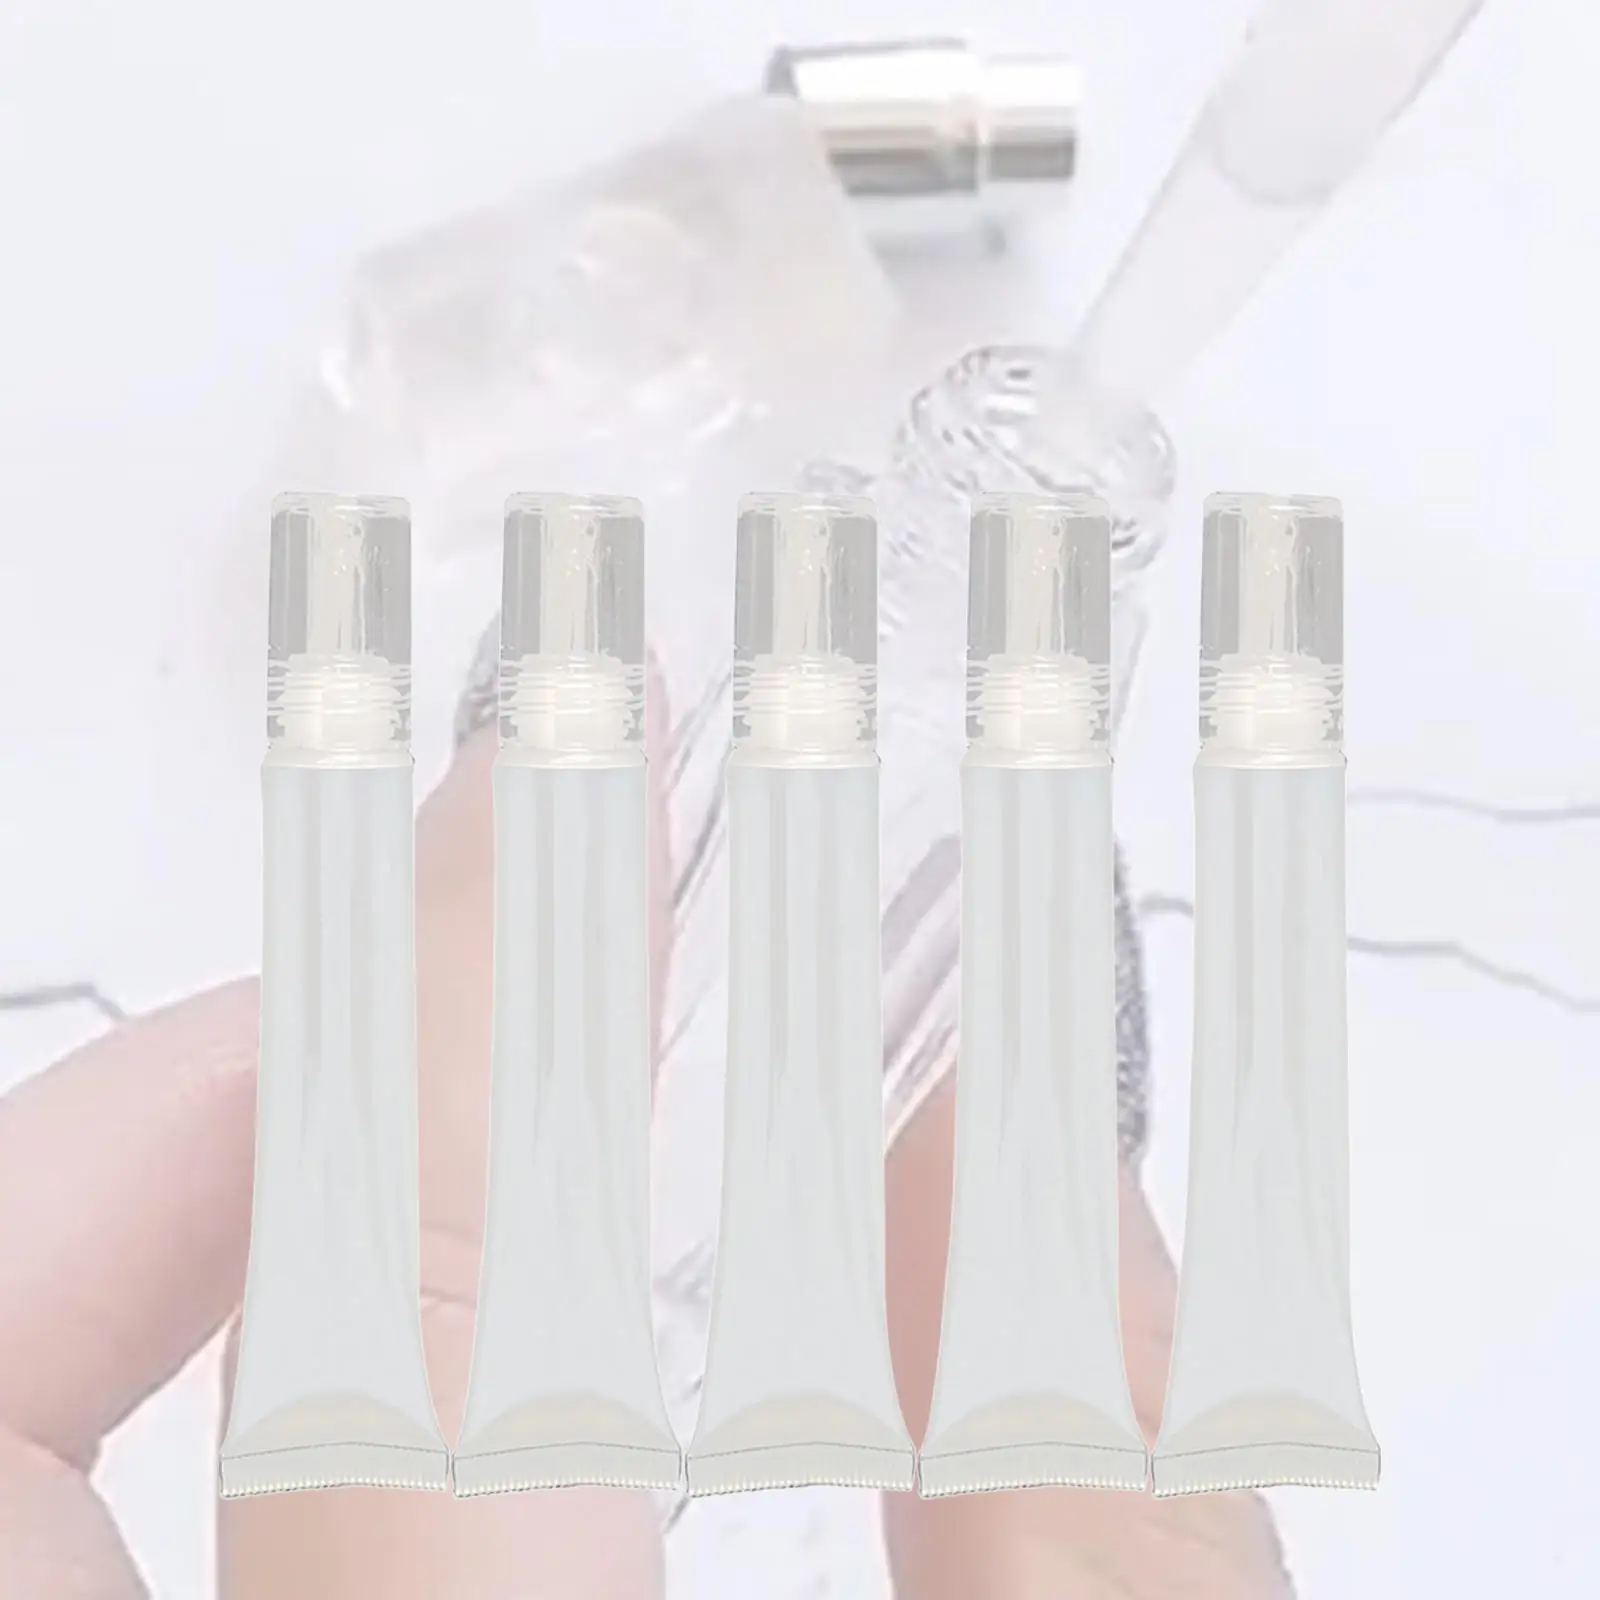 5x Cosmetic Soft Tubes Travel Packing Translucent Sample 20ml/0.7oz Reusable Container for Shampoo Lotion Lip Gloss Toothpaste